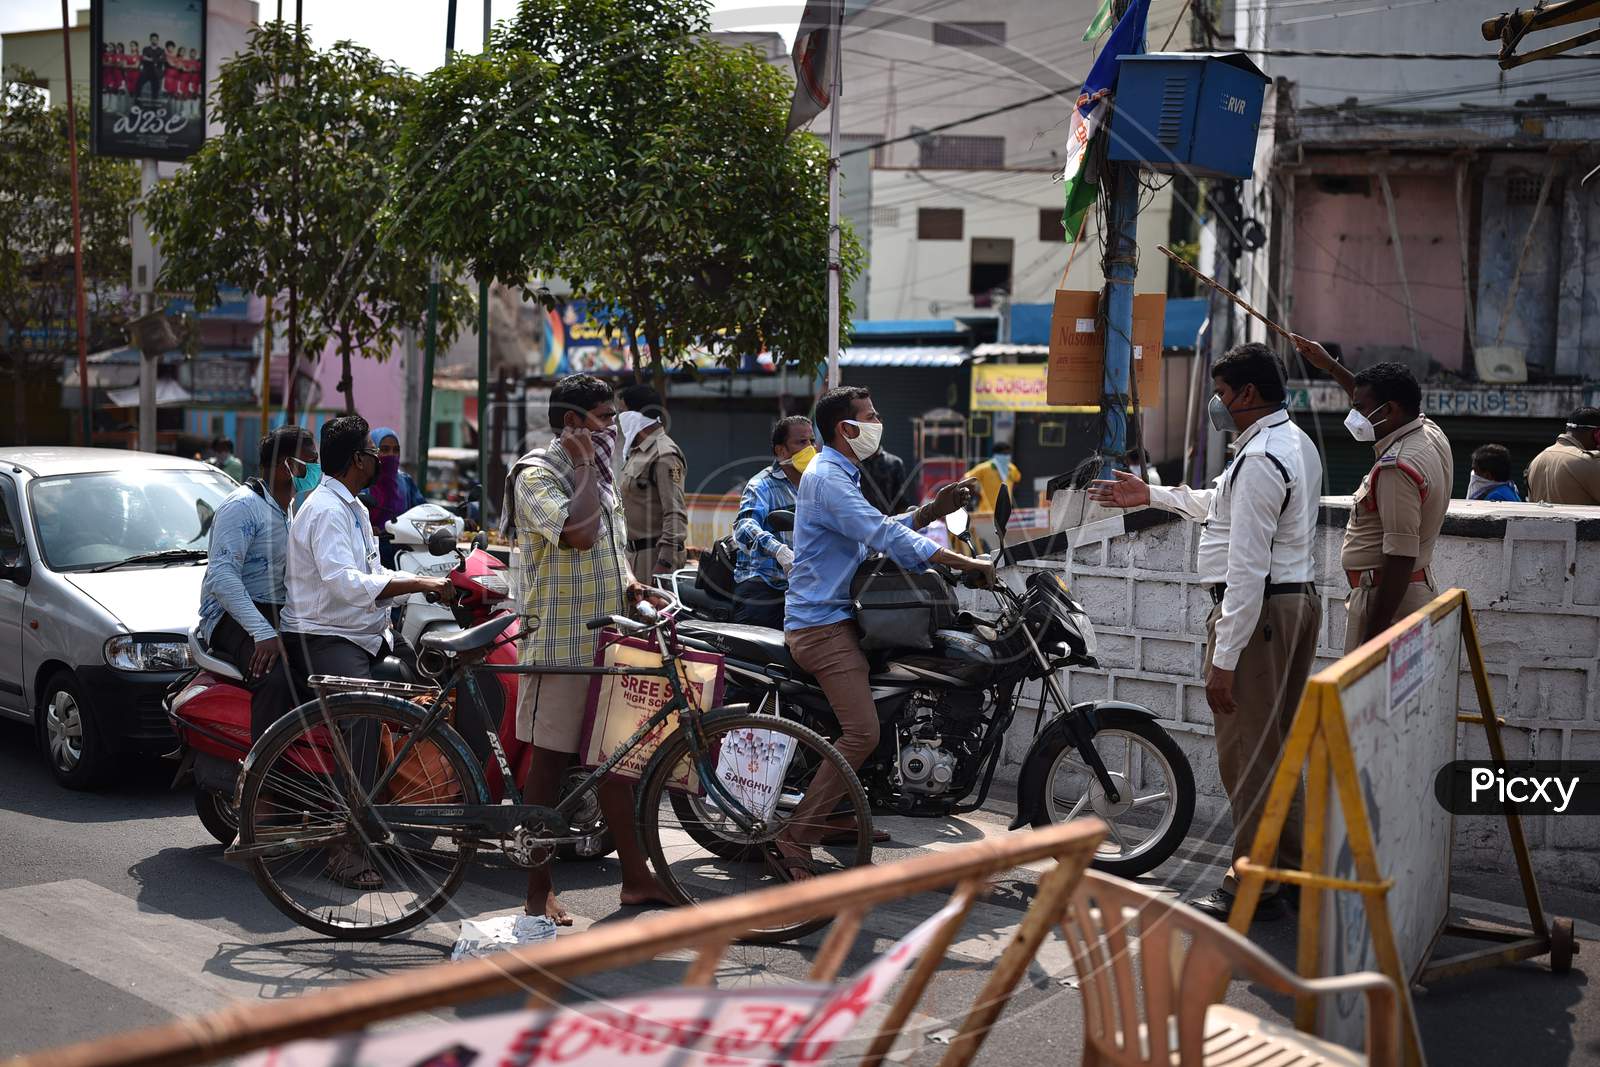 Police Personnel Divert The Commuters During The Nationwide Lockdown Imposed In The Wake Of Coronavirus Pandemic, In Vijayawada.